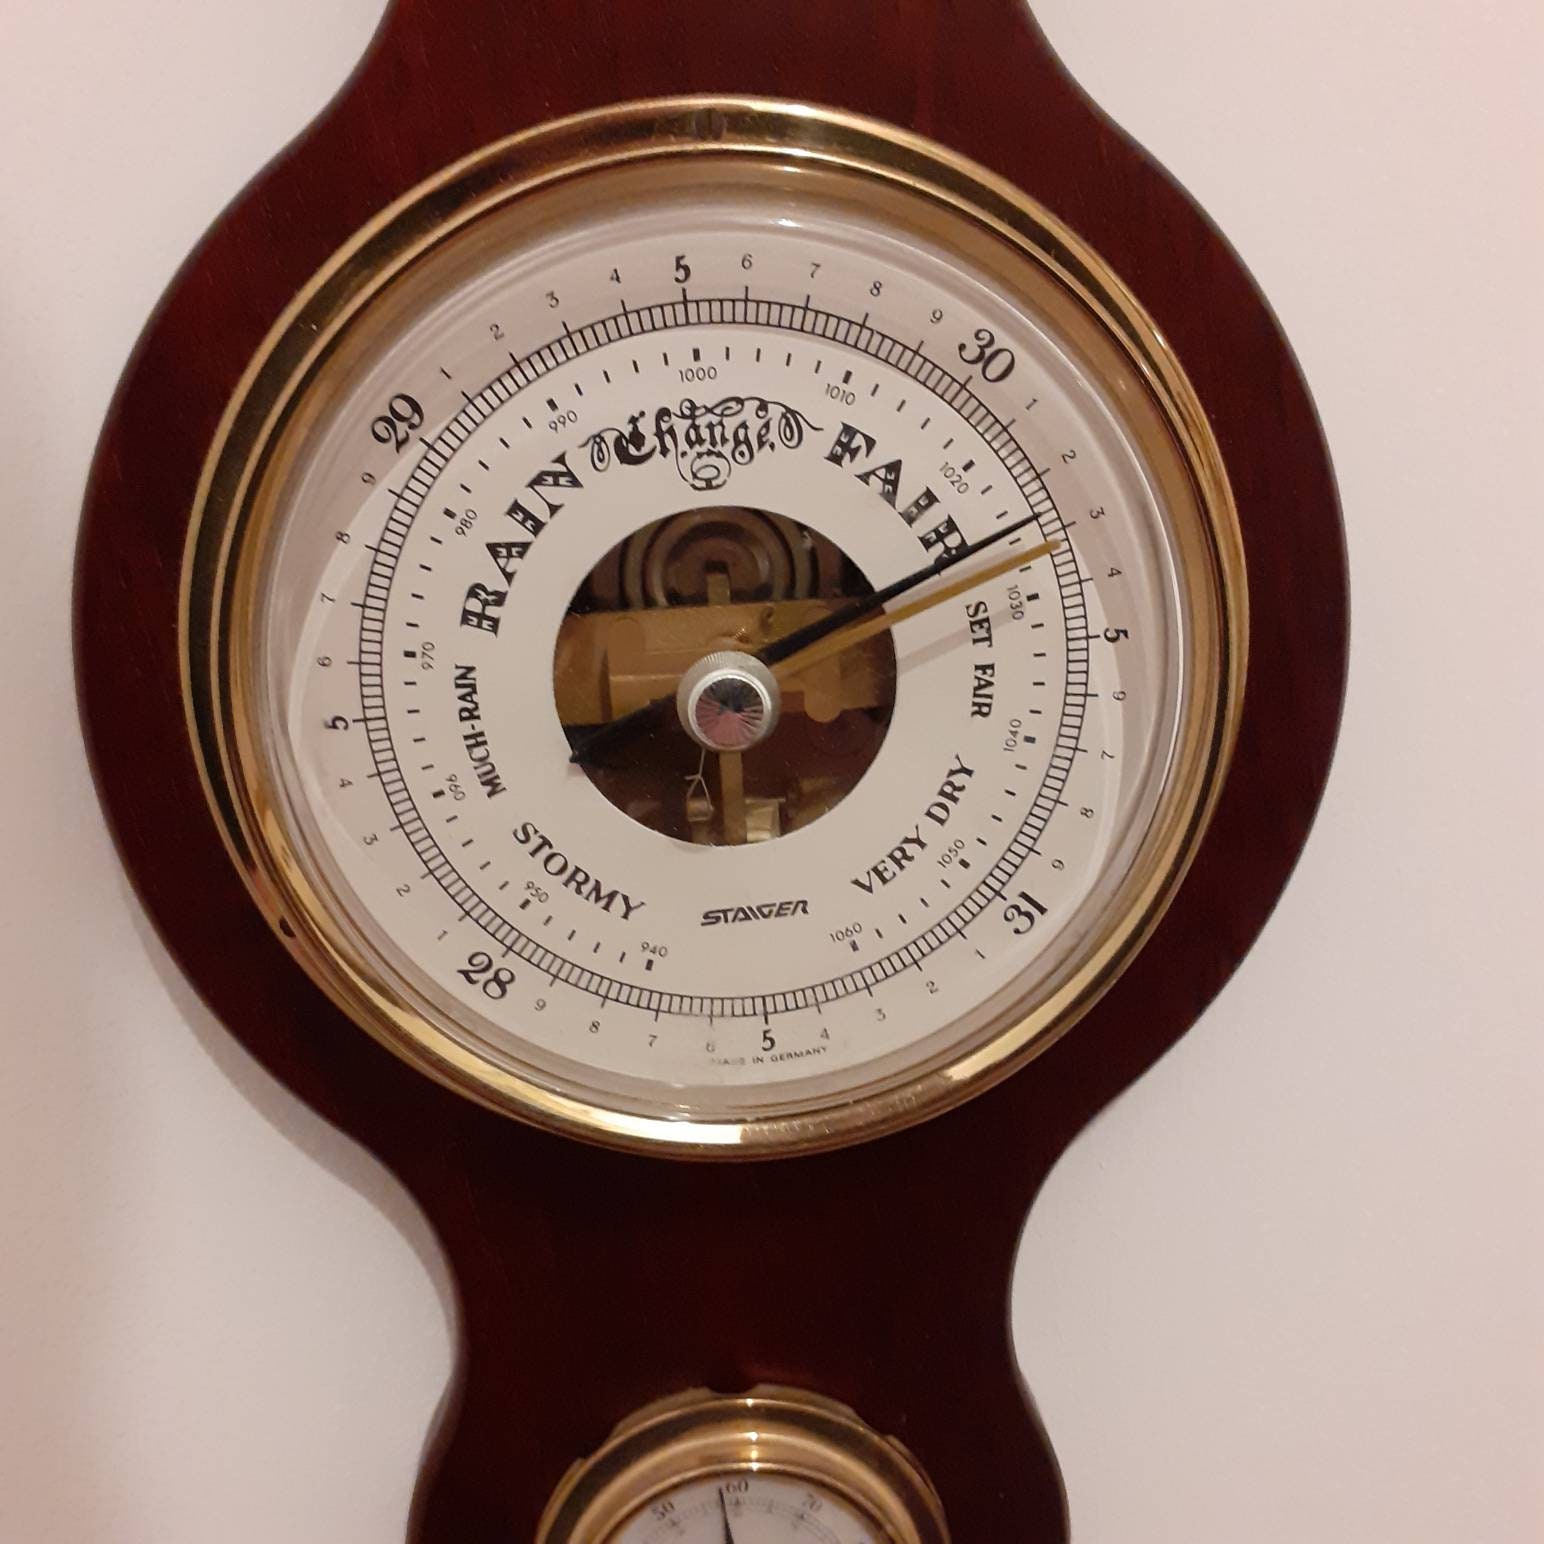 Staiger German Barometer. Vintage wooden nautical barometer - Il Fullxfull.2726437952 6key